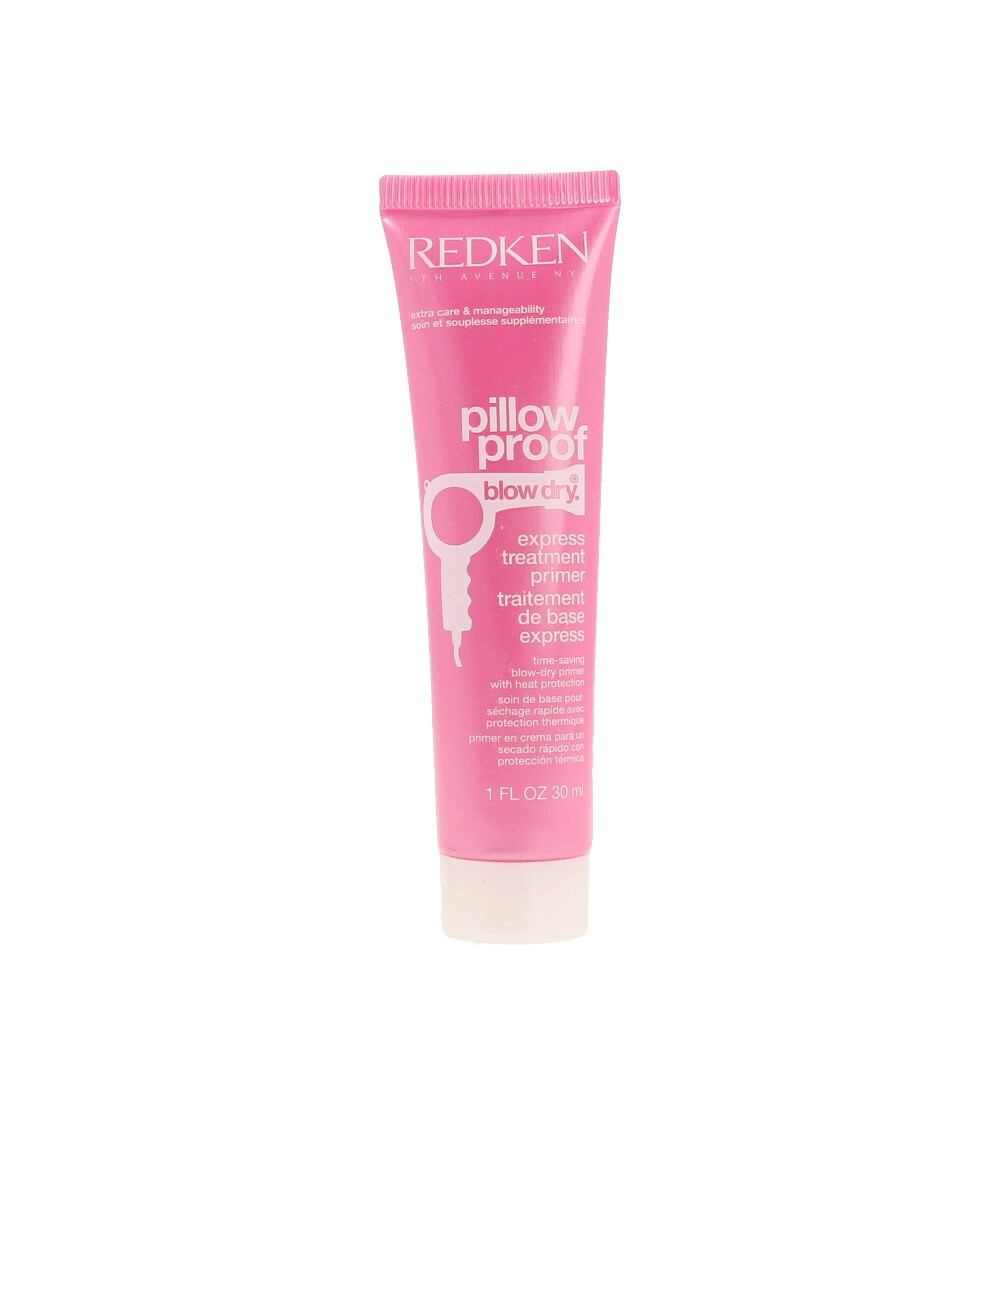 PILLOW PROOF blow dry express primer